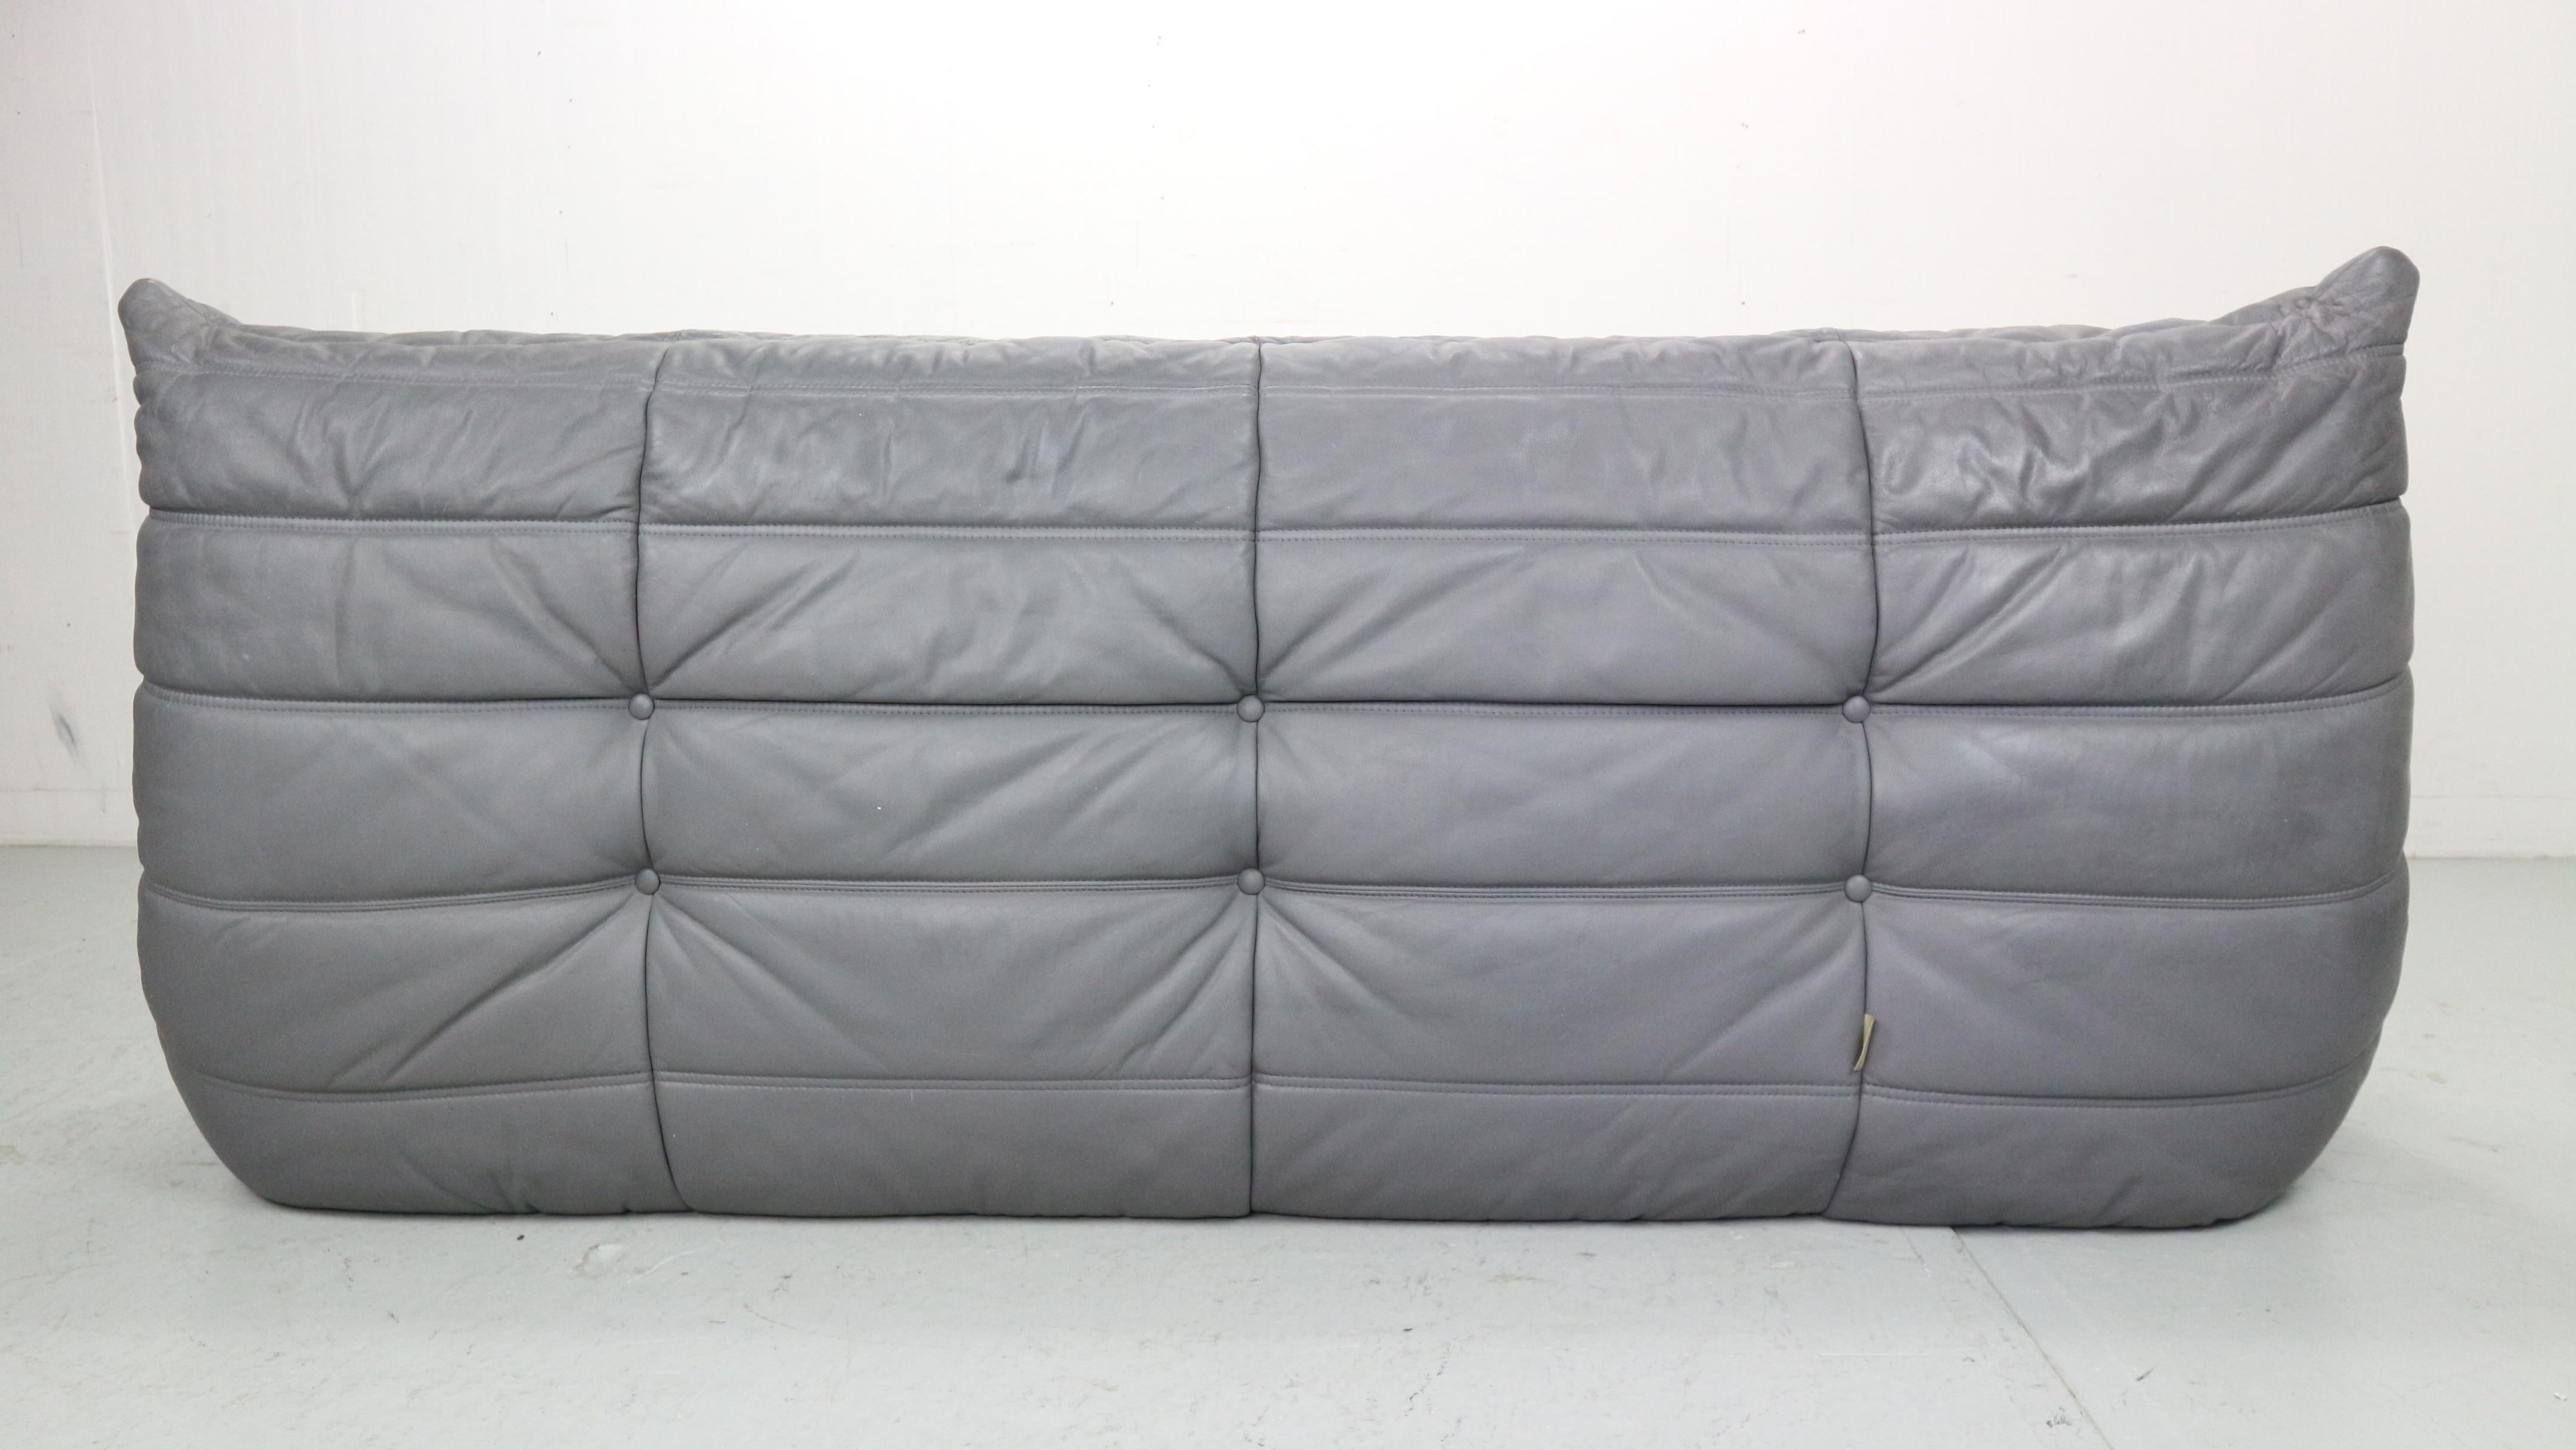 20th Century 'Togo' three-seater sofa by M. Ducaroy for Ligne Roset in grey leather, 1980s